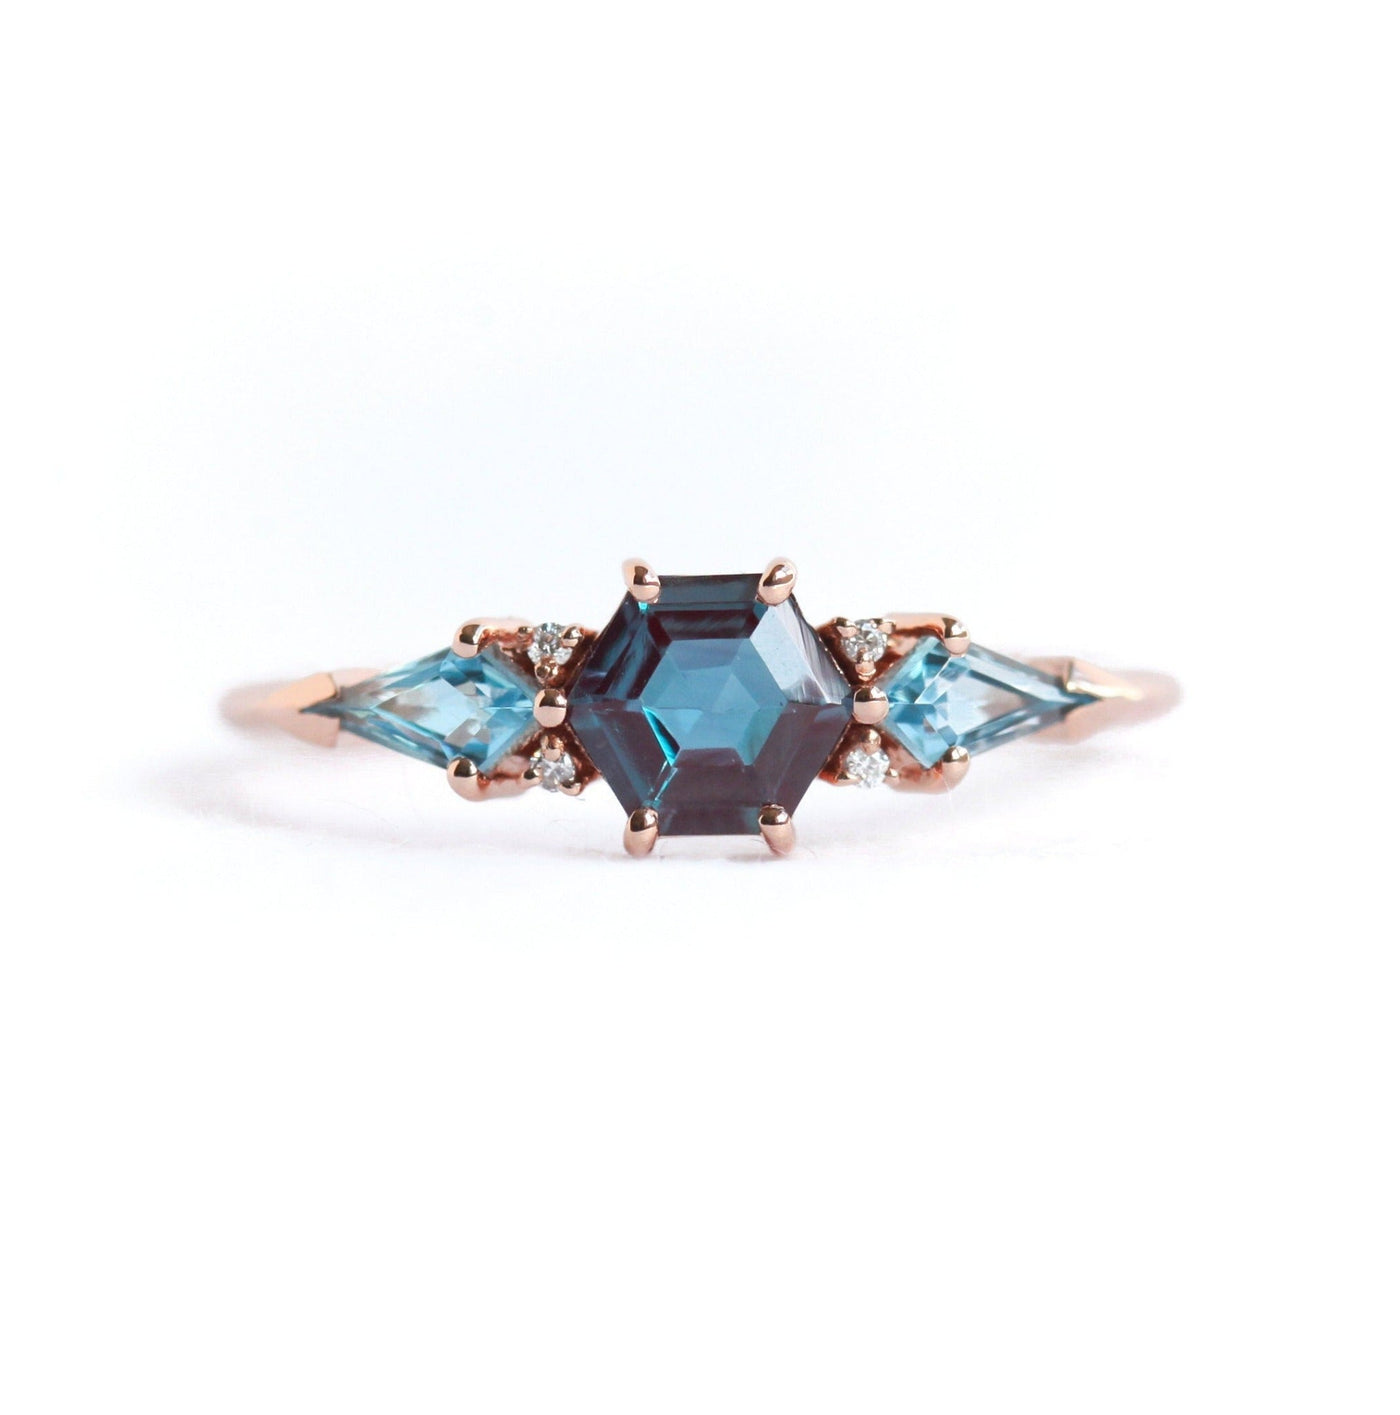 Teal Hexagon Alexandrite Cluster Ring with 2 Side Blue Topaz Stones and 4 White Round Diamonds